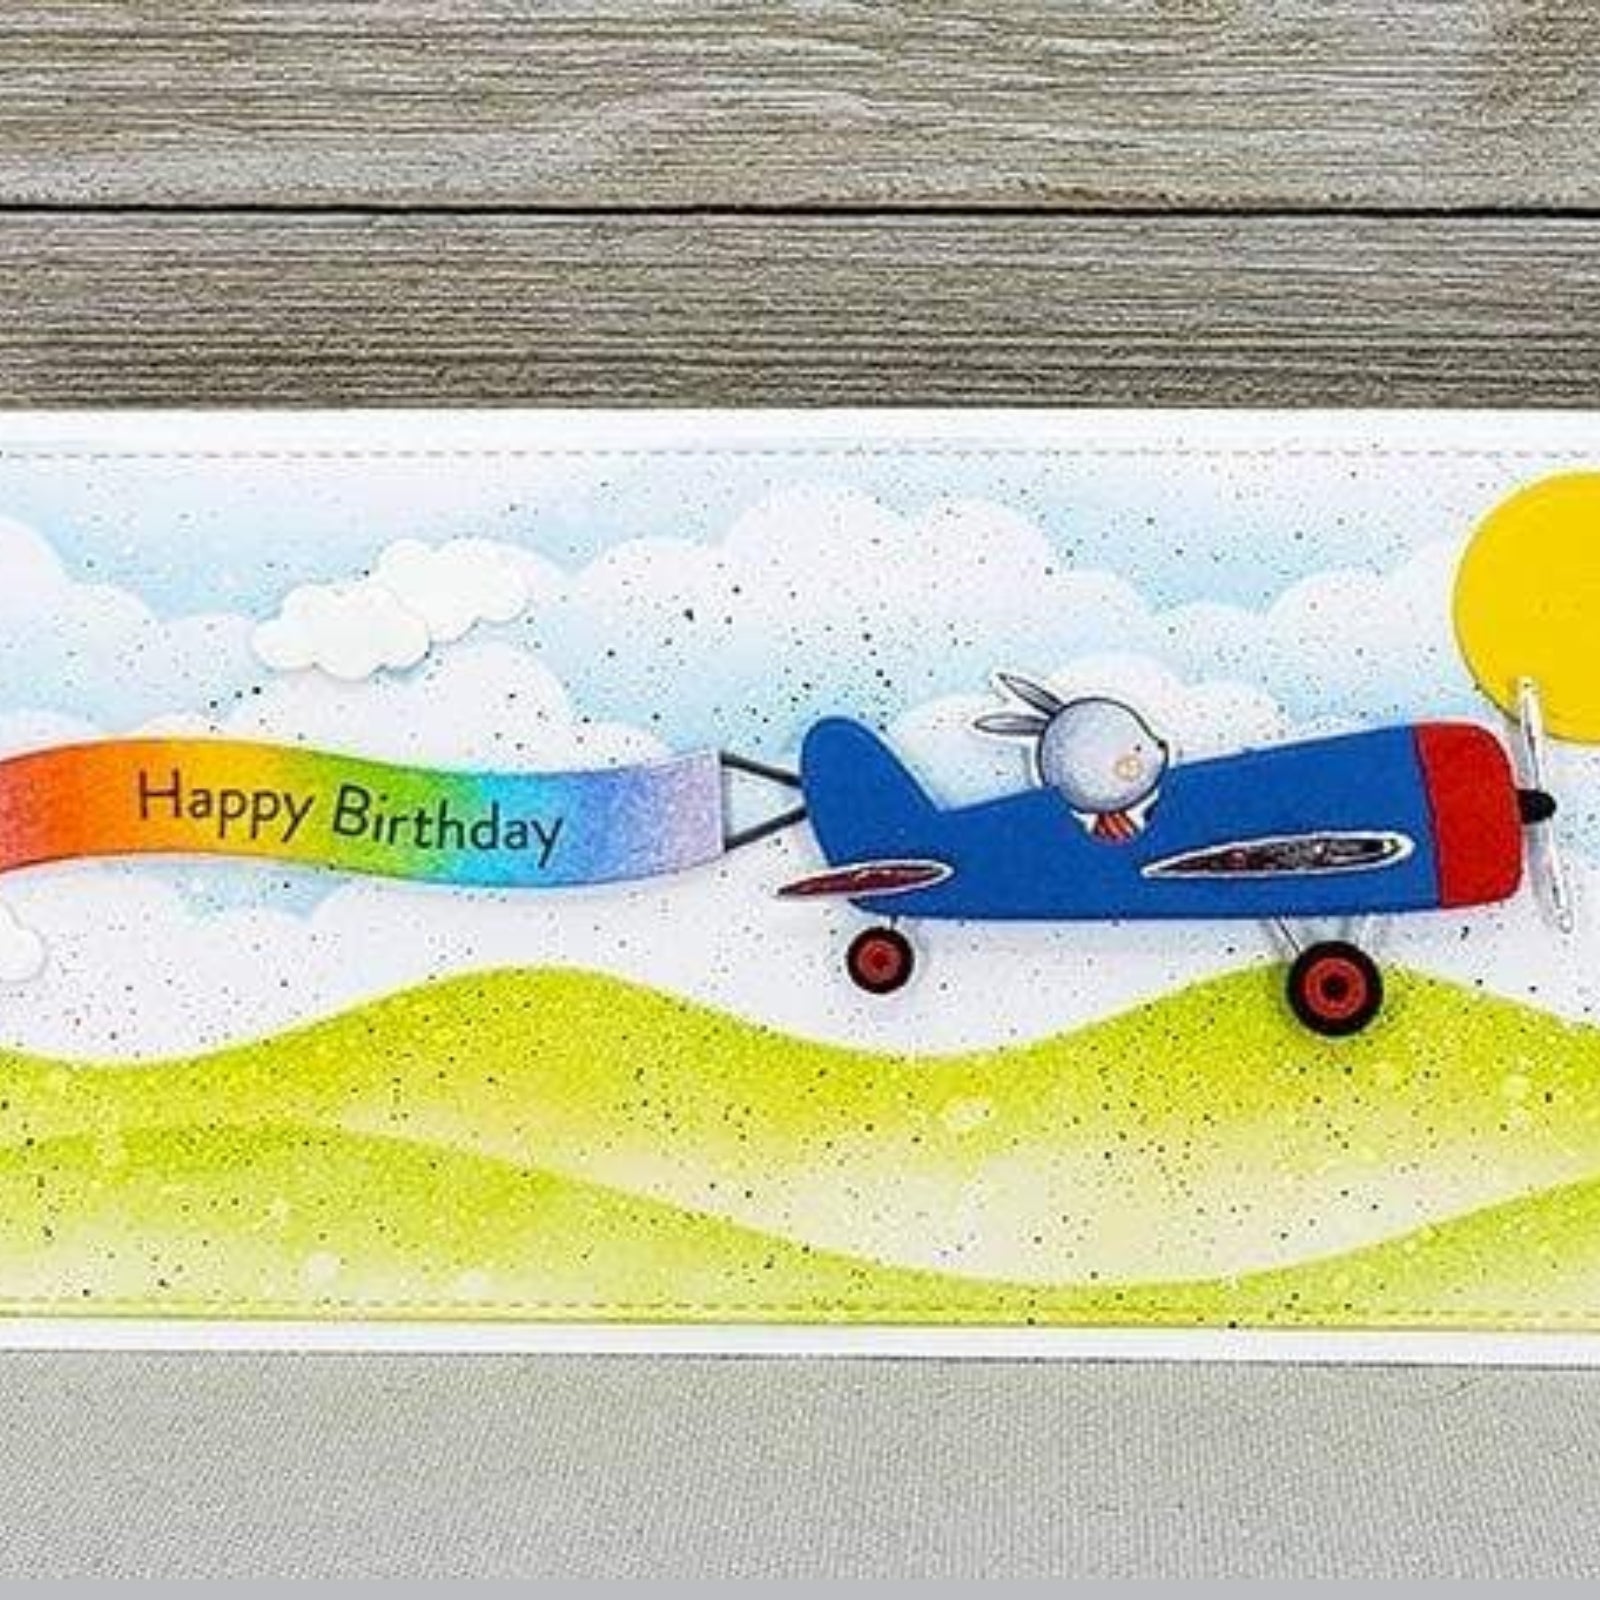 Build a Plane w Clouds Cutting & Embossing Dies